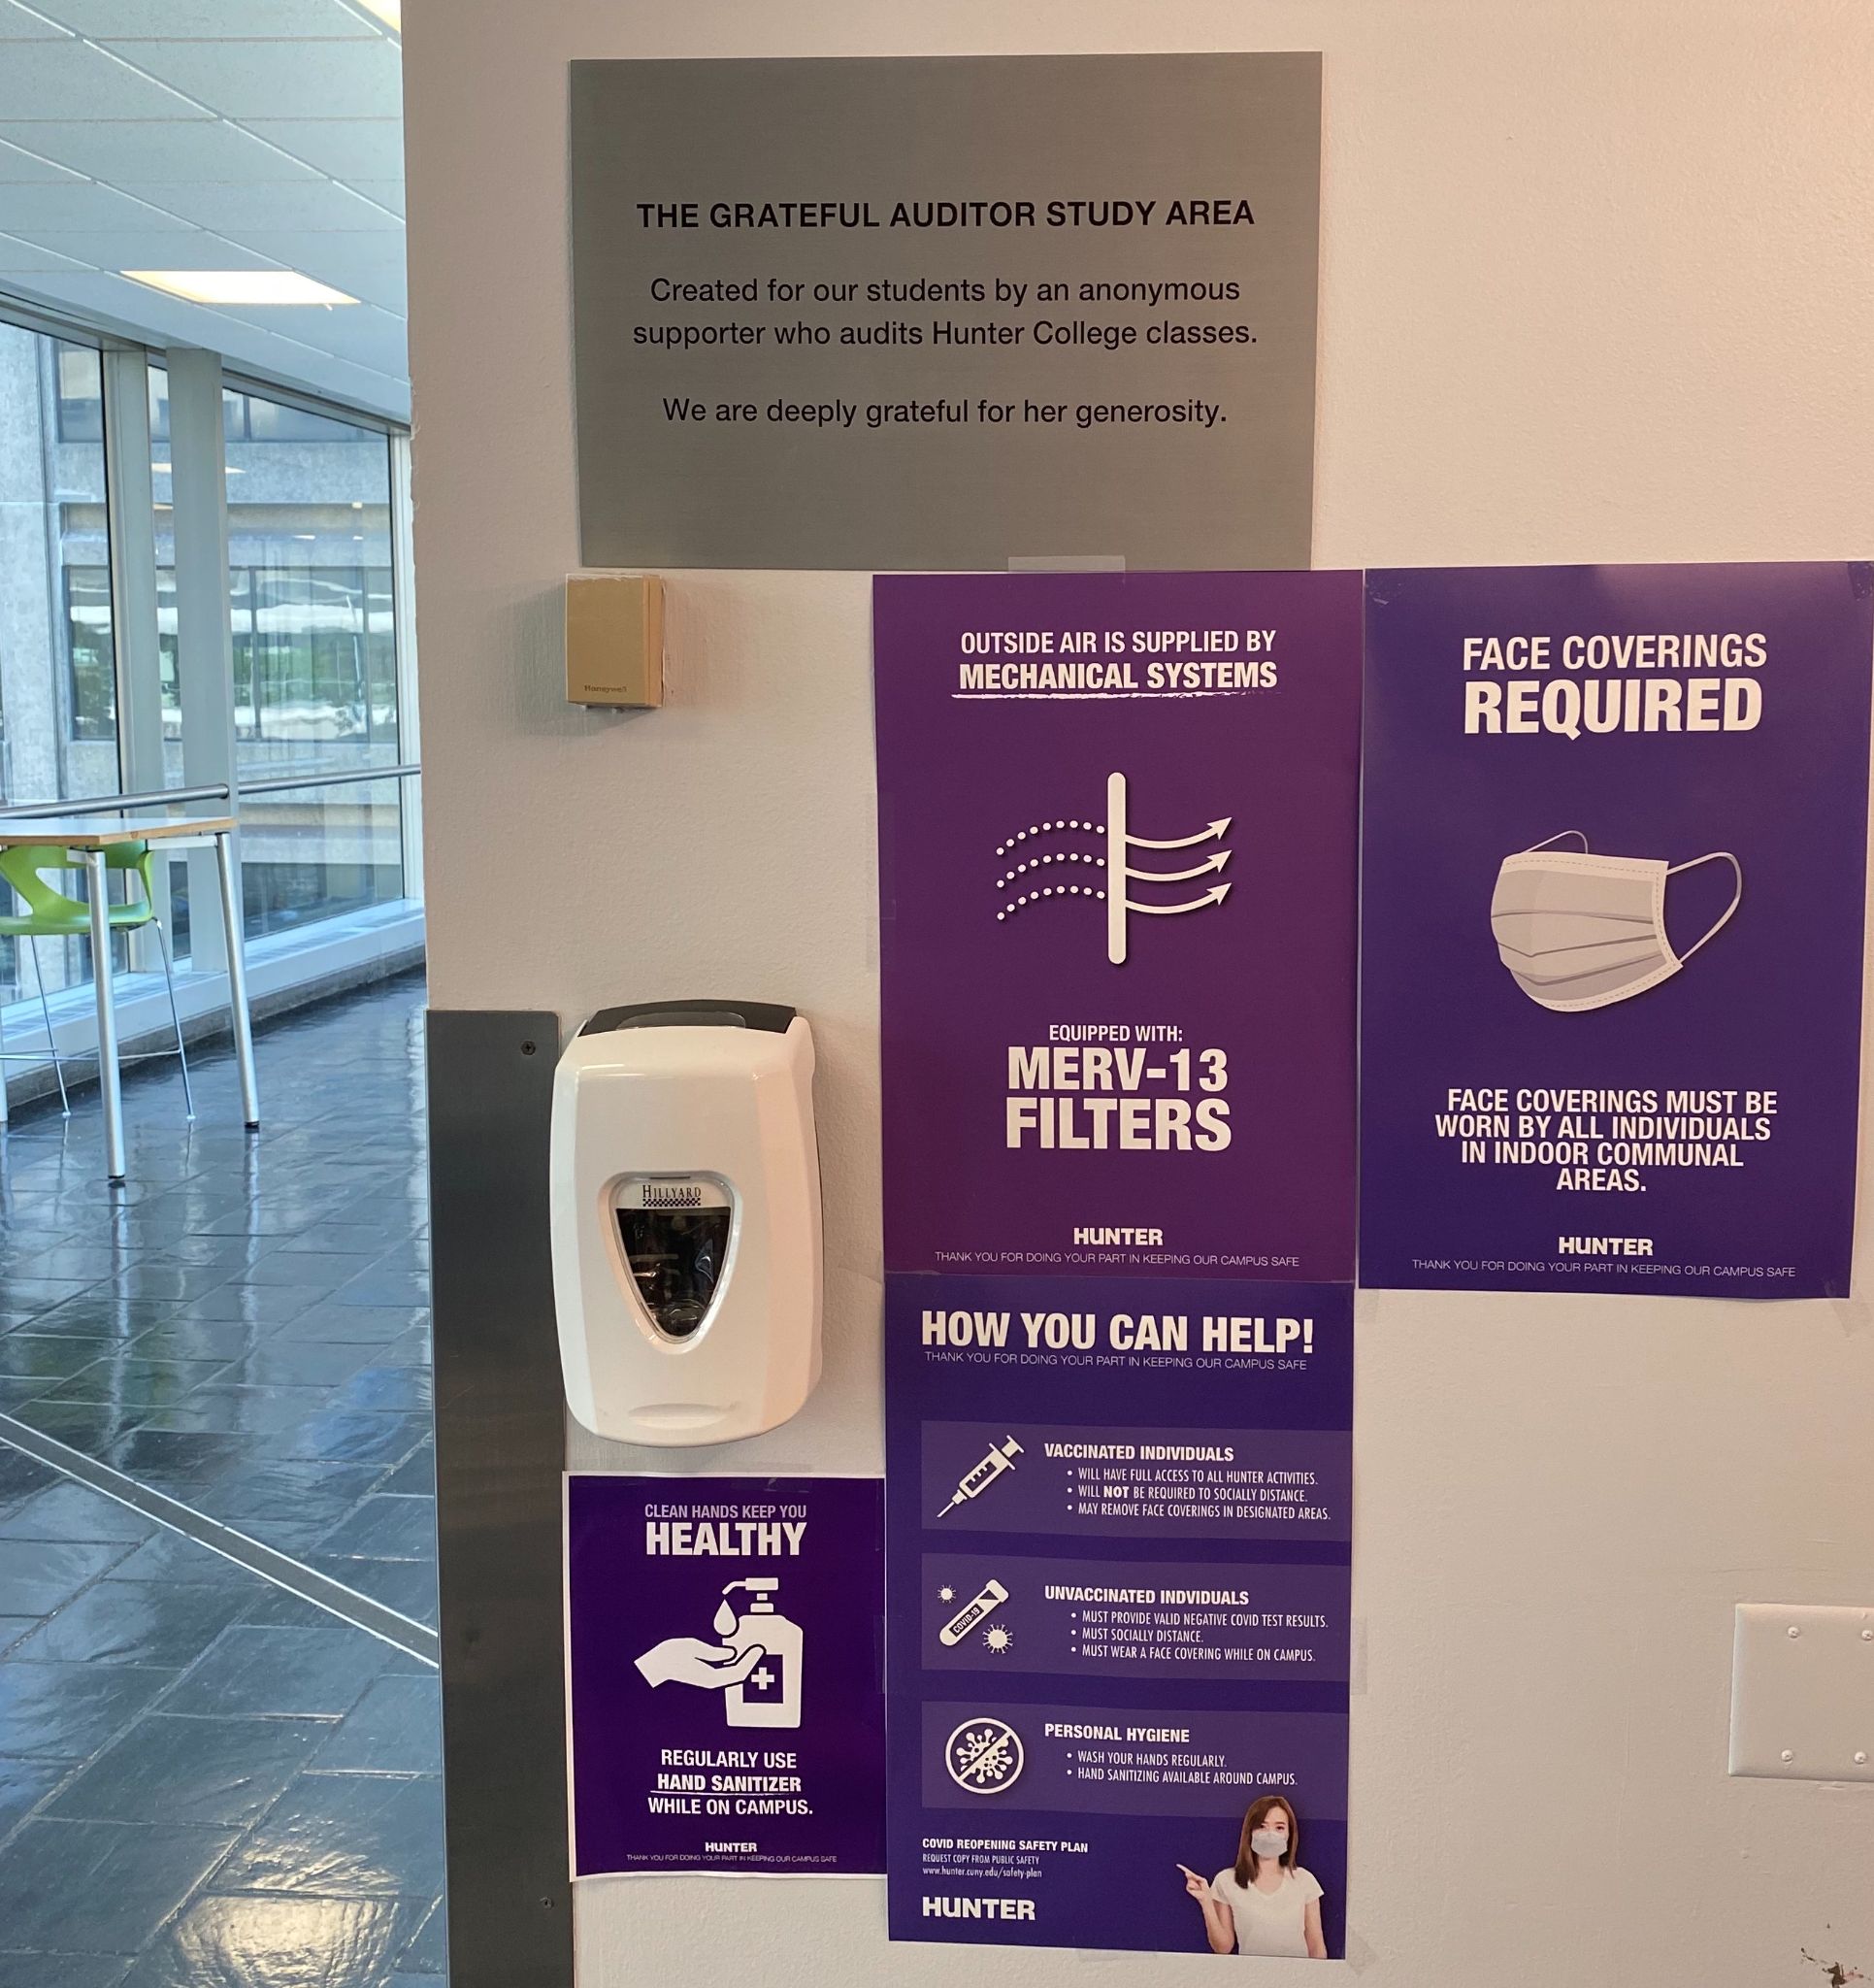 A wall in one of the halls at Hunter College is nearly covered in purple posters with Hunter's COVID-19 safety guidelines. One poster asks for all individuals to wear a mask indoors. Another poster displays distinct recommendations for unvaccinated people and unvaccinated people. A third poster encourages students to use hand sanitizer regularly, underneath a sanitizer dispenser. A fourth poster notes that mechanical ventilation systems are present in the hall. 